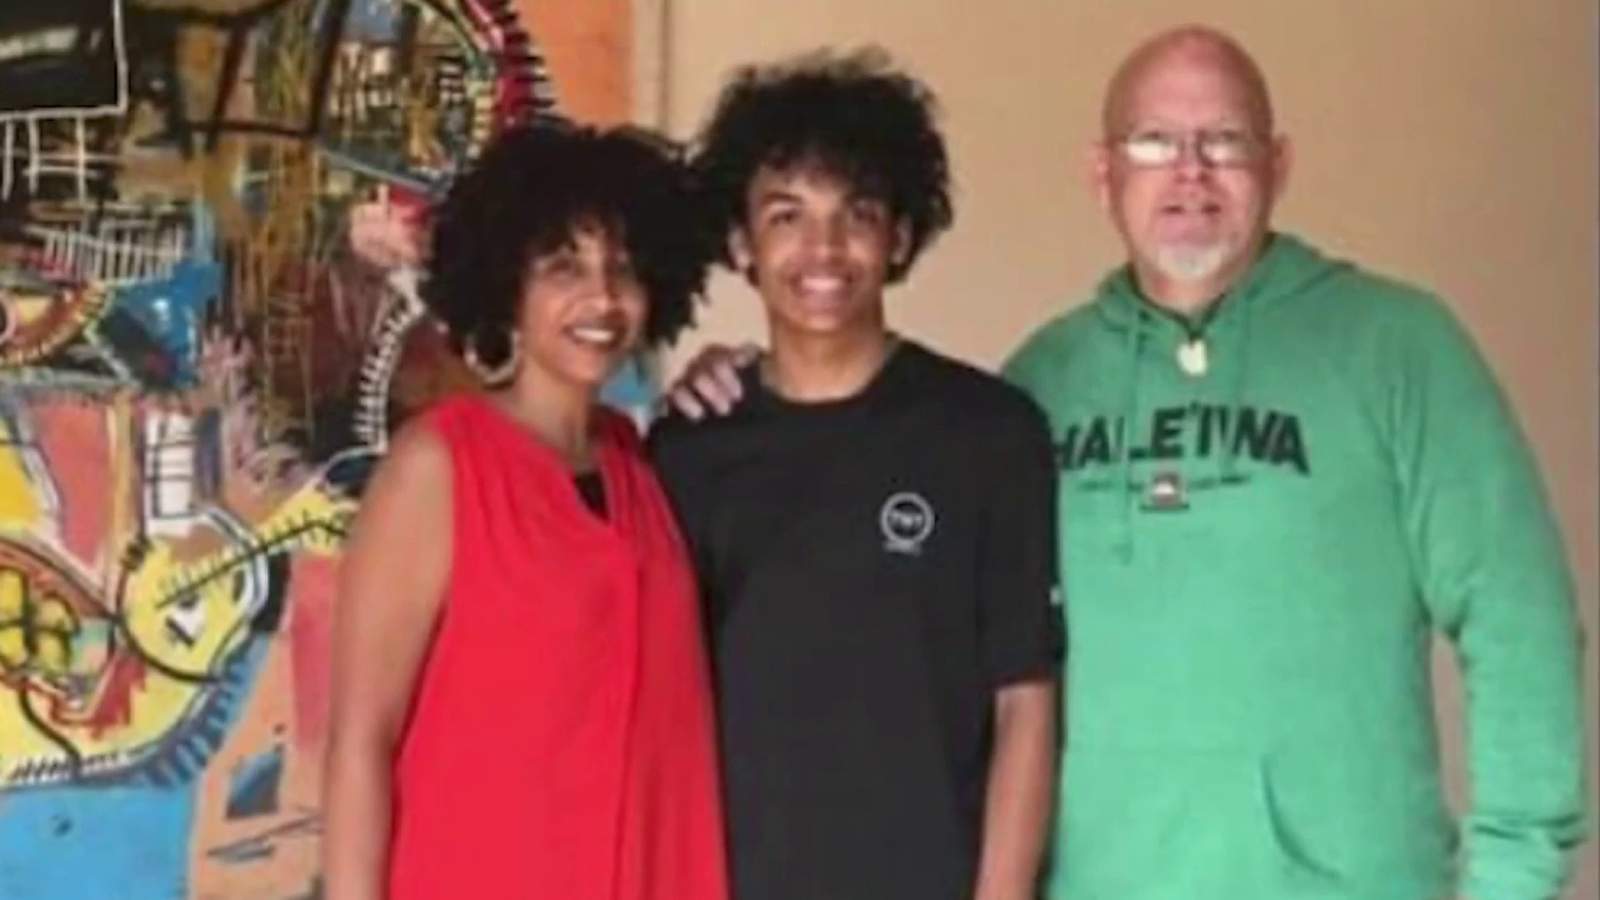 Biracial couple shares experience, advice on having conversations about race with children